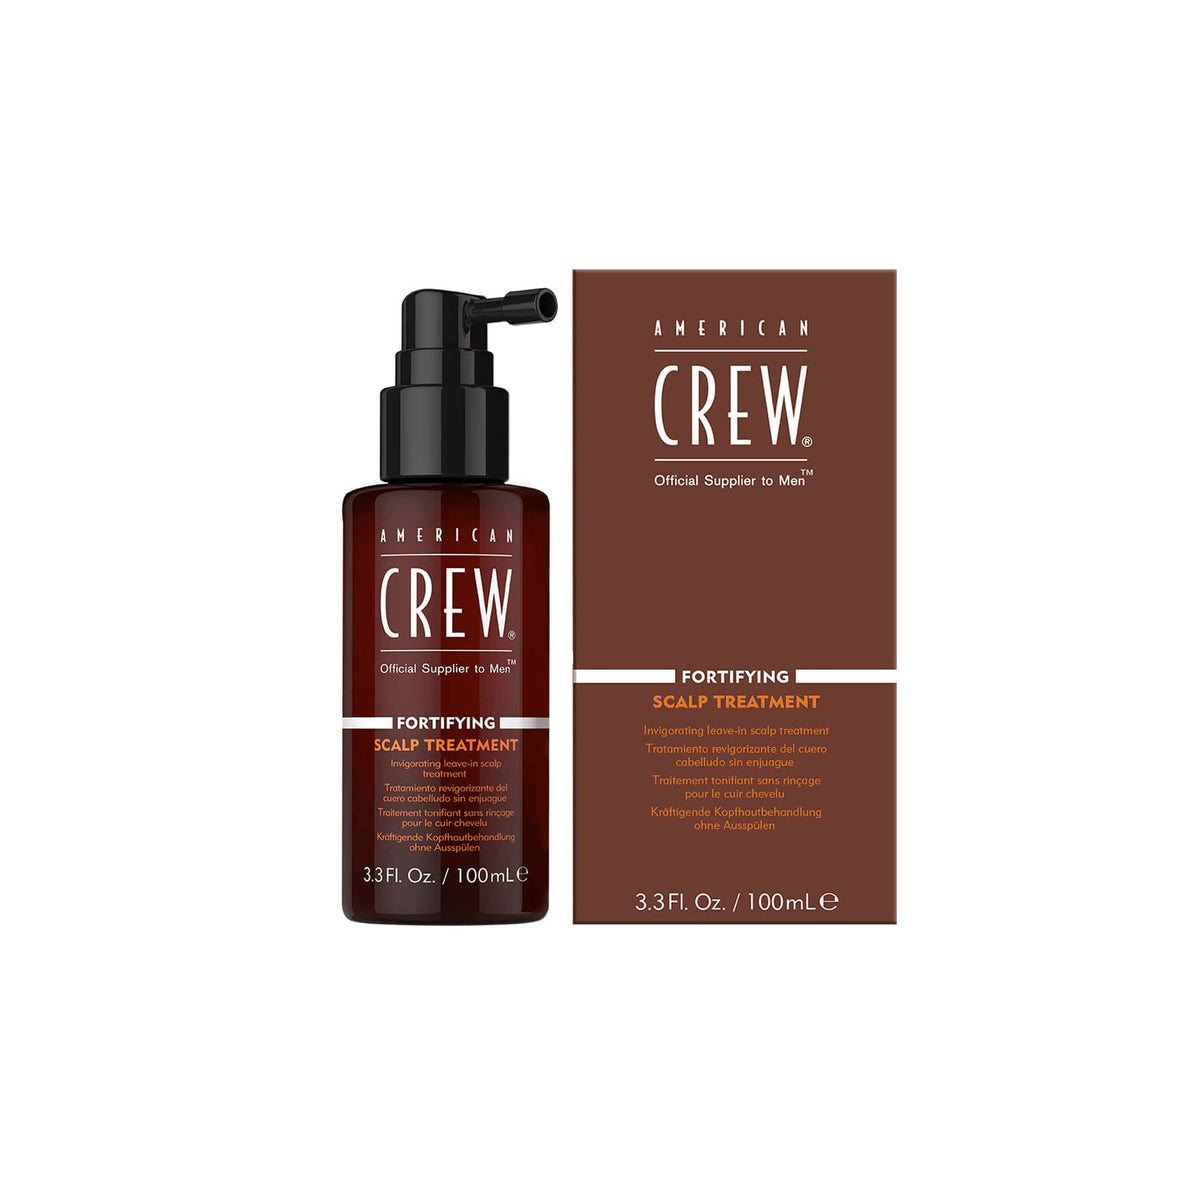 American Crew Fortifying Scalp Treatment 100ml - Shop Online| Retail Box